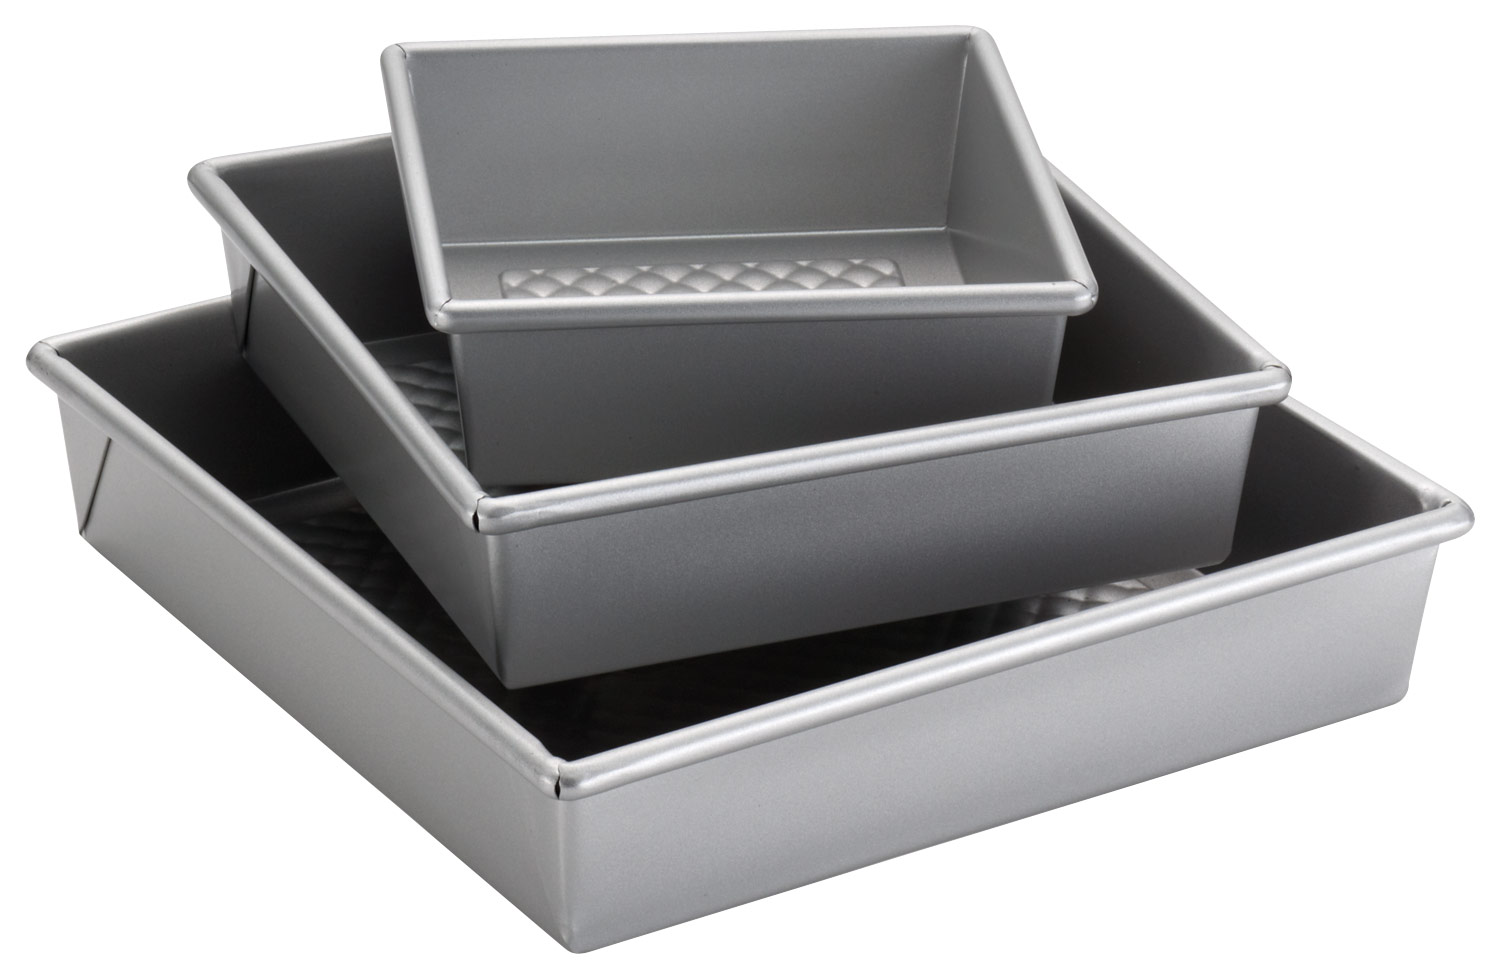 Best Buy: Cake Boss Professional Square Cake Pans (3-Count) Silver